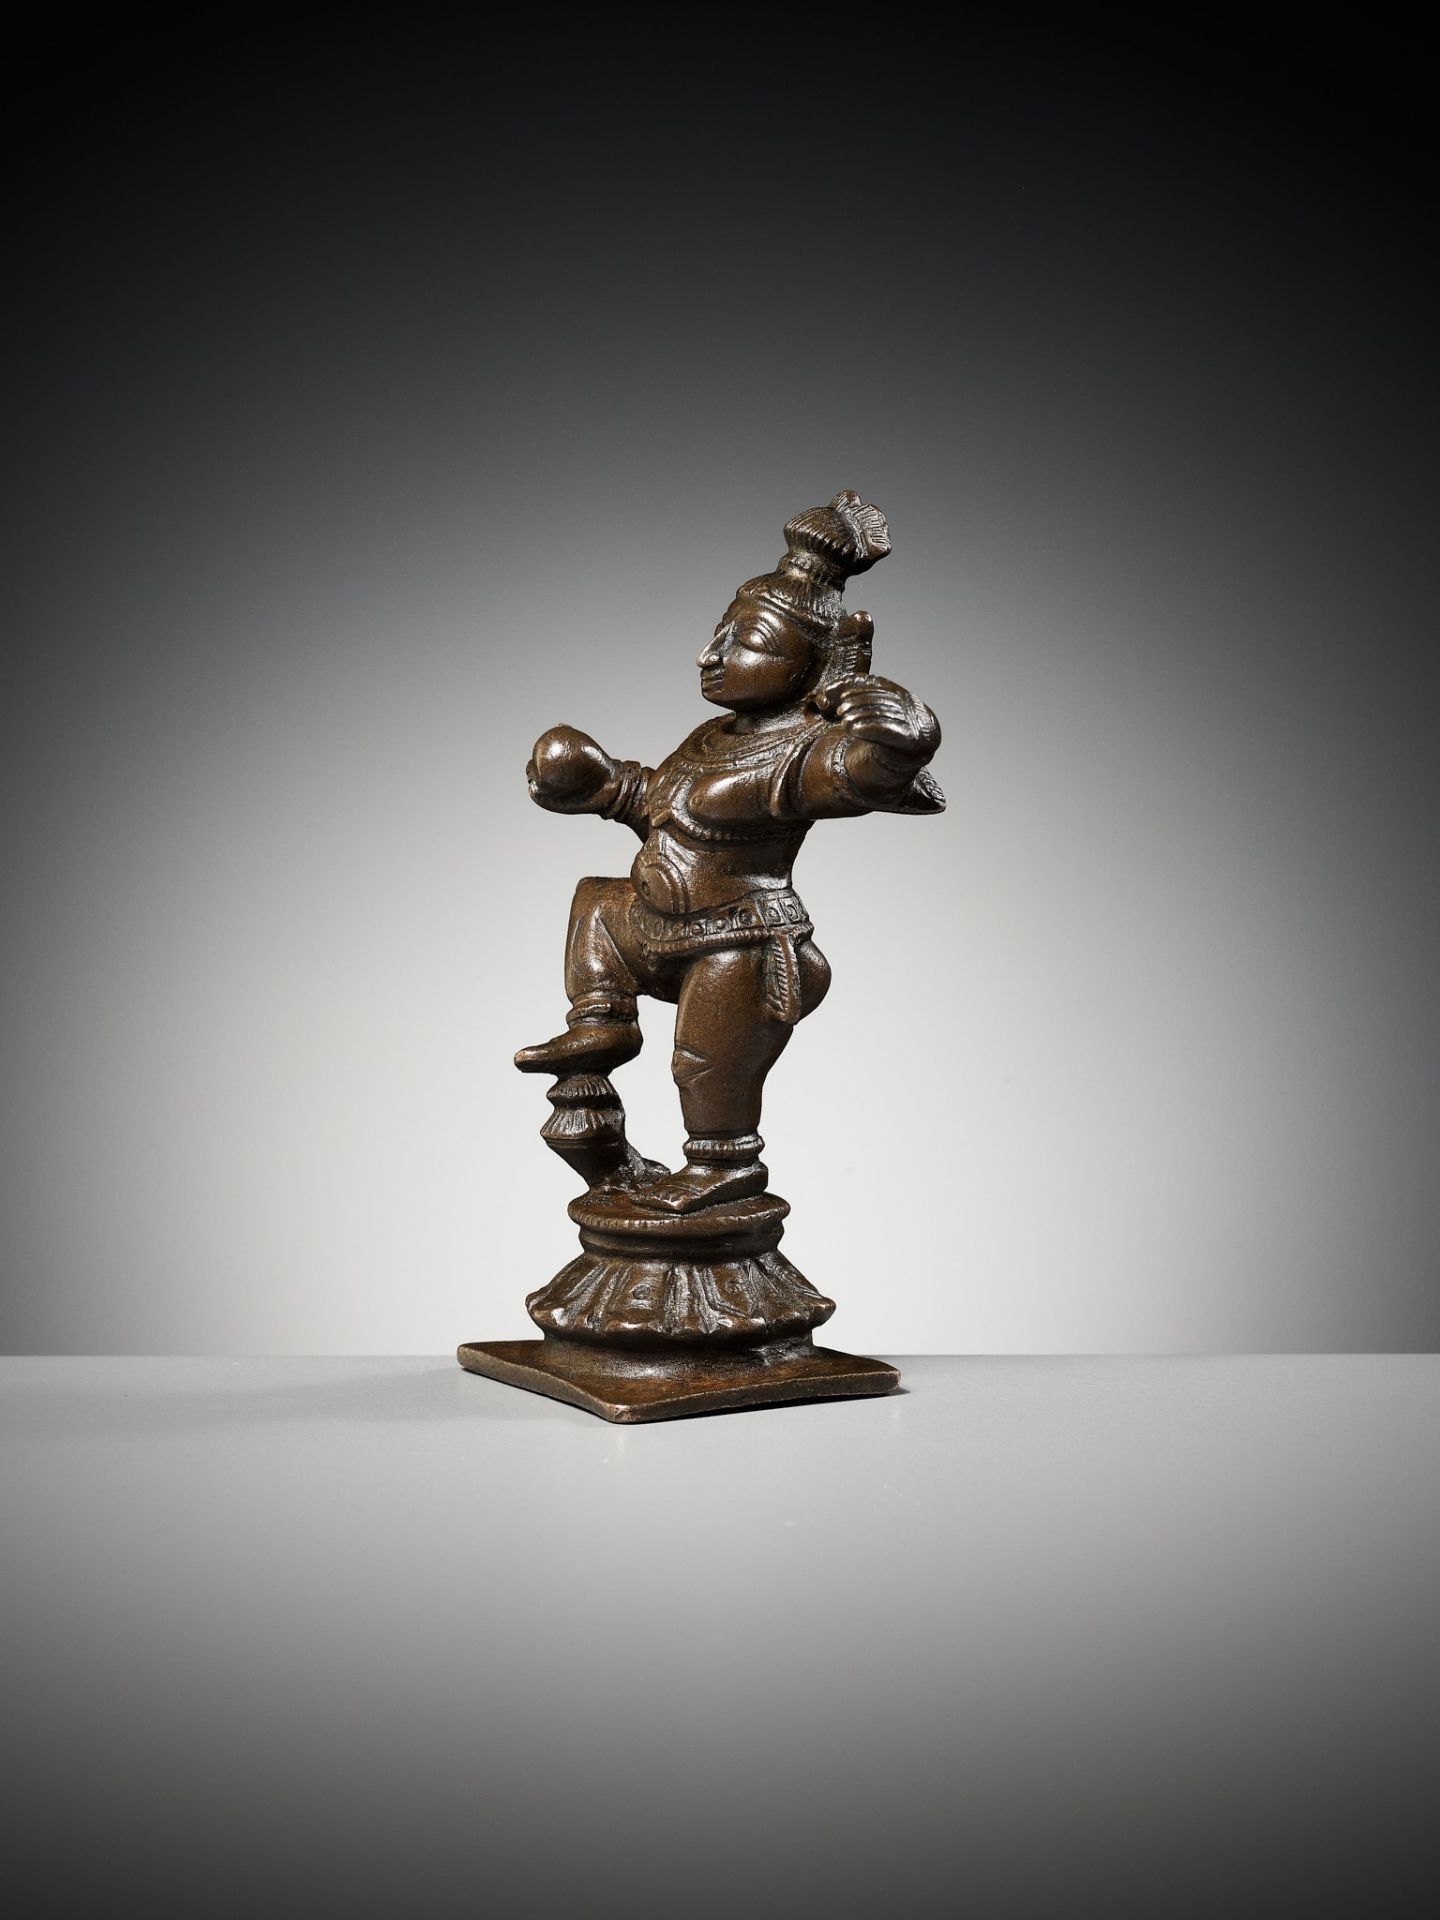 A COPPER ALLOY FIGURE OF DANCING KRISHNA, SOUTH INDIA, 17TH-18TH CENTURY - Image 3 of 13